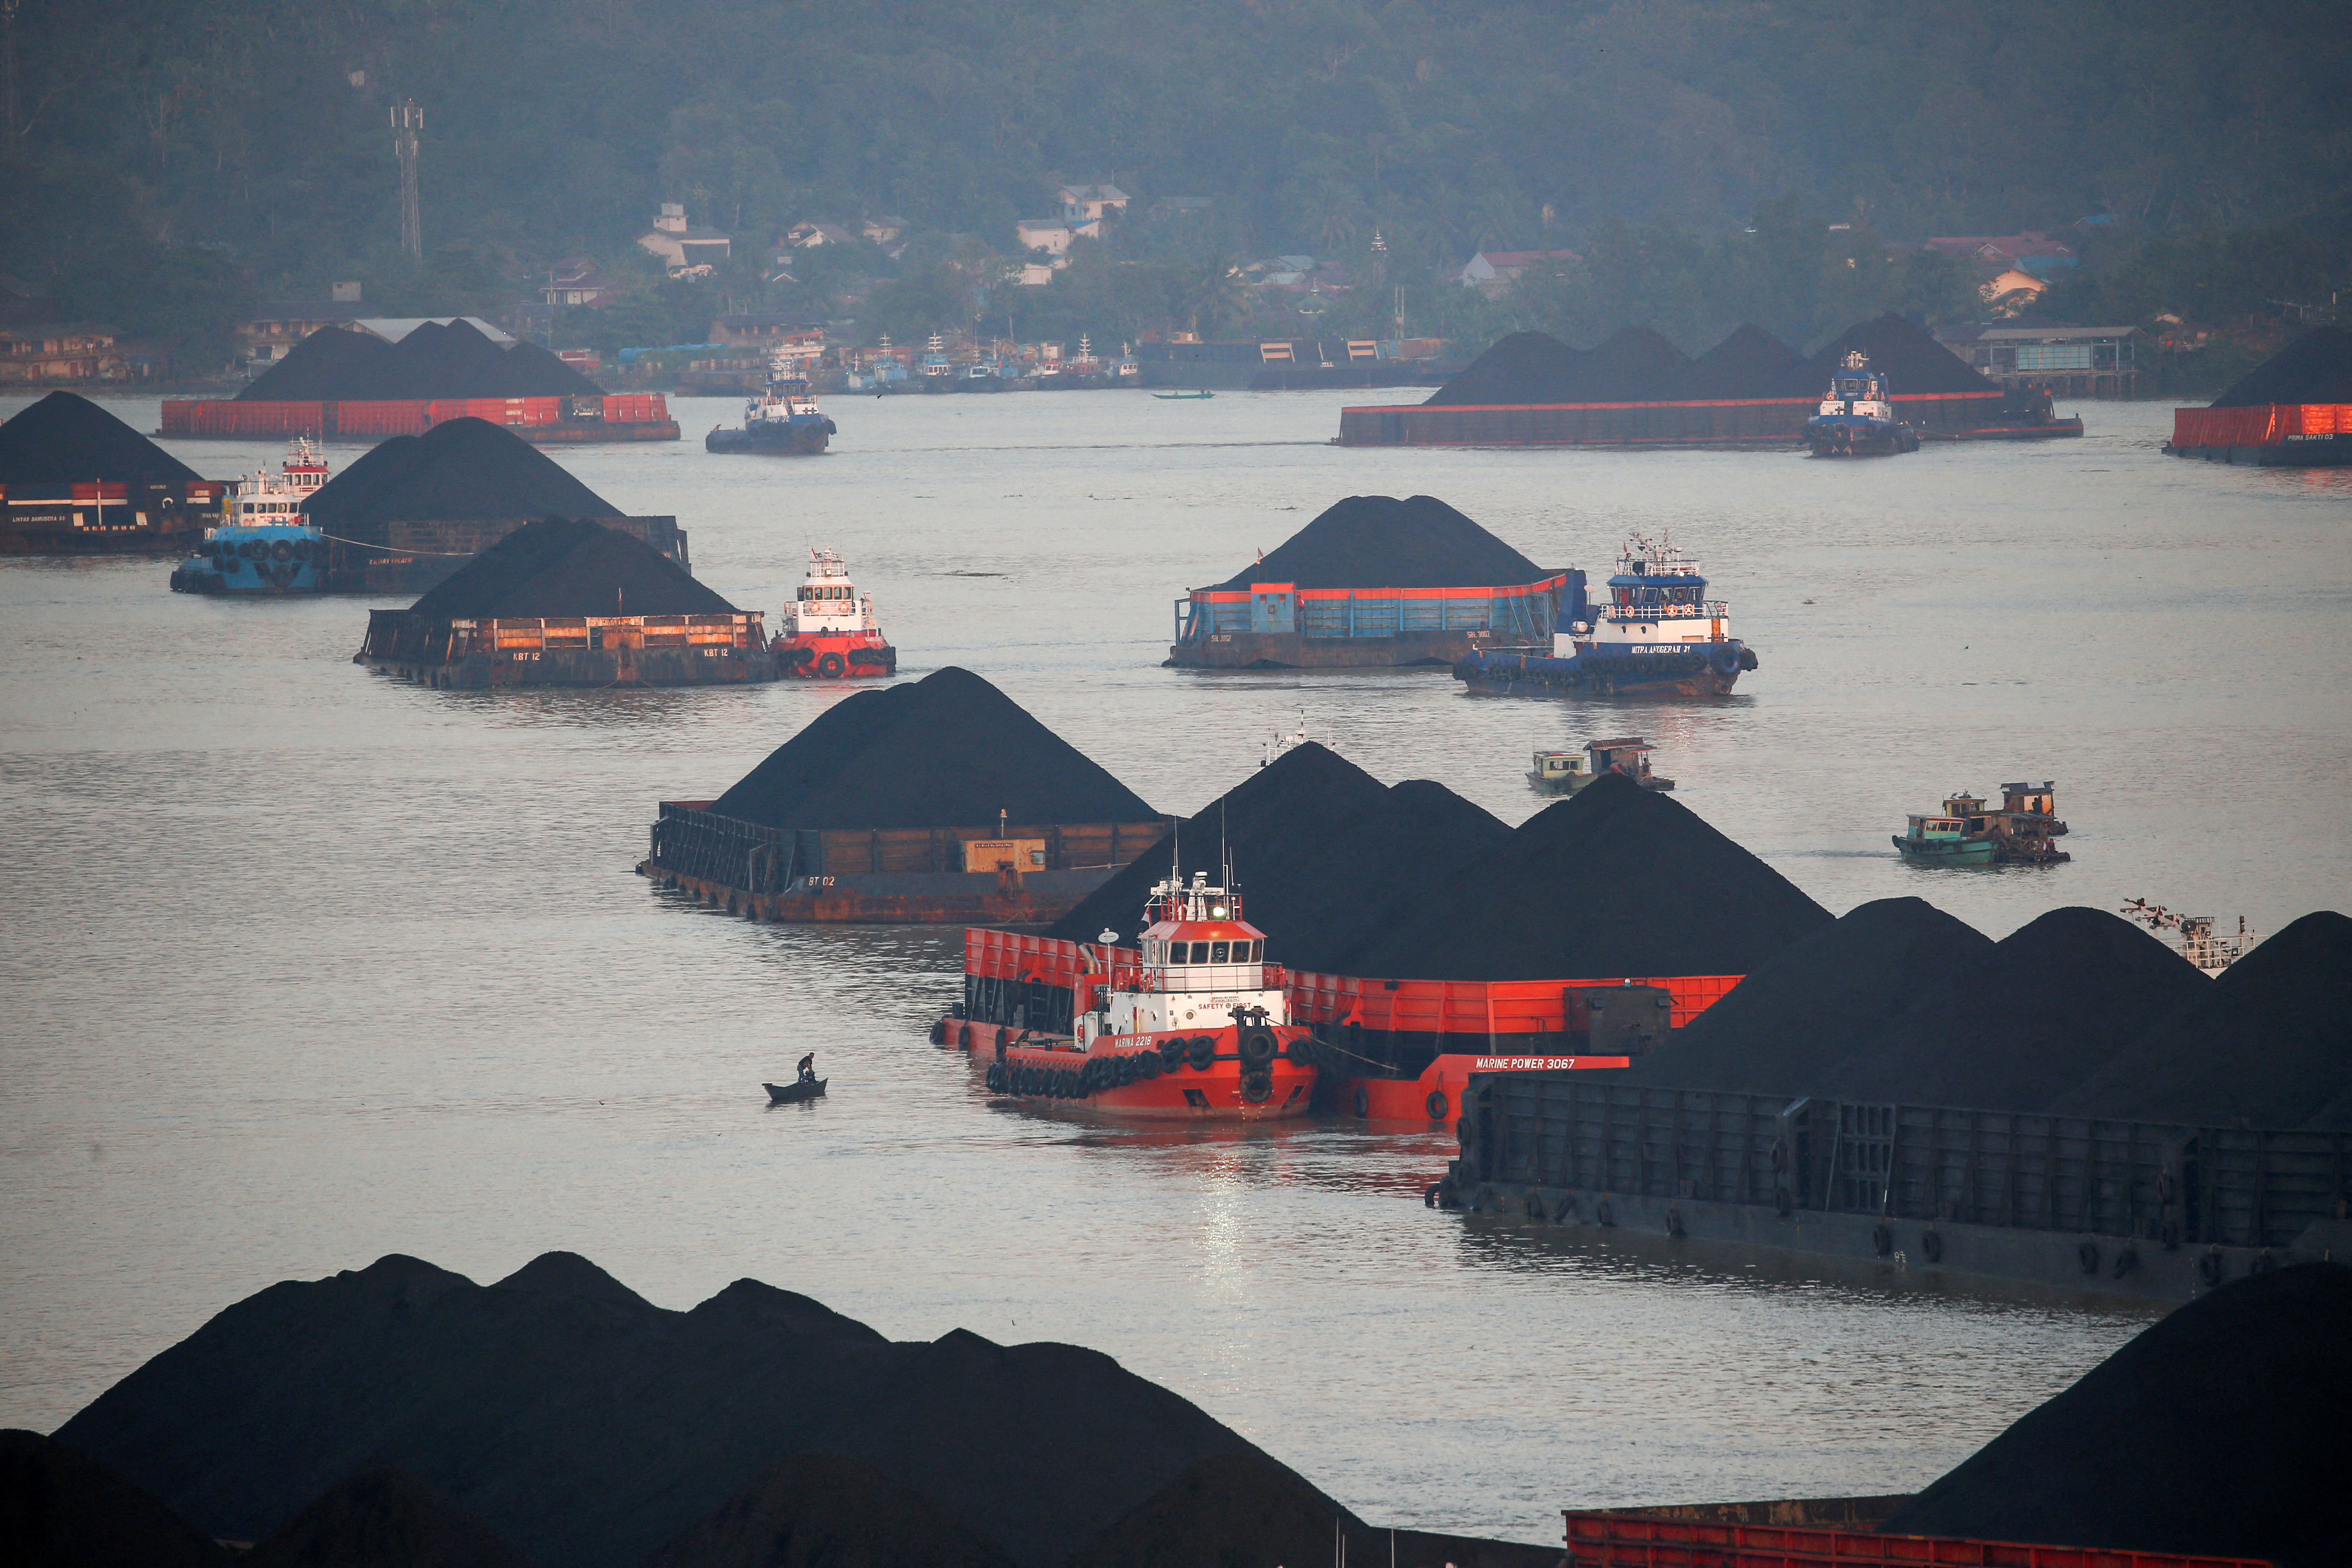 Coal barges are pictured as they queue to be pulled along Mahakam river in Samarinda